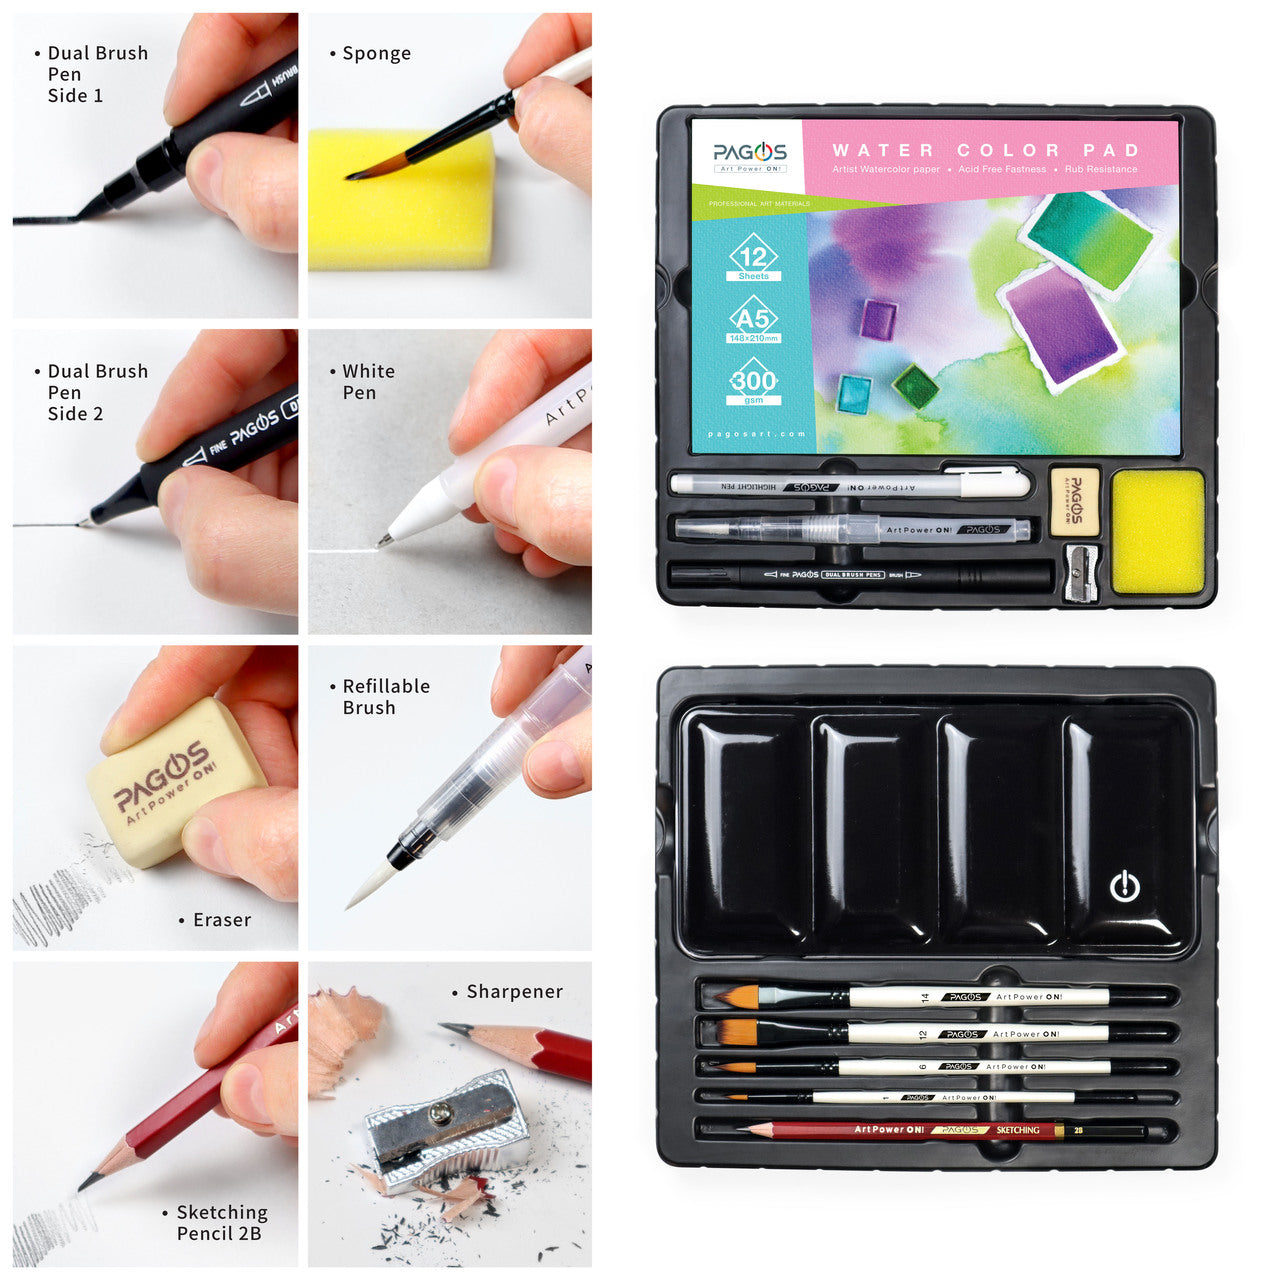 Pagos Artist Quality All-In-One Watercolor Set